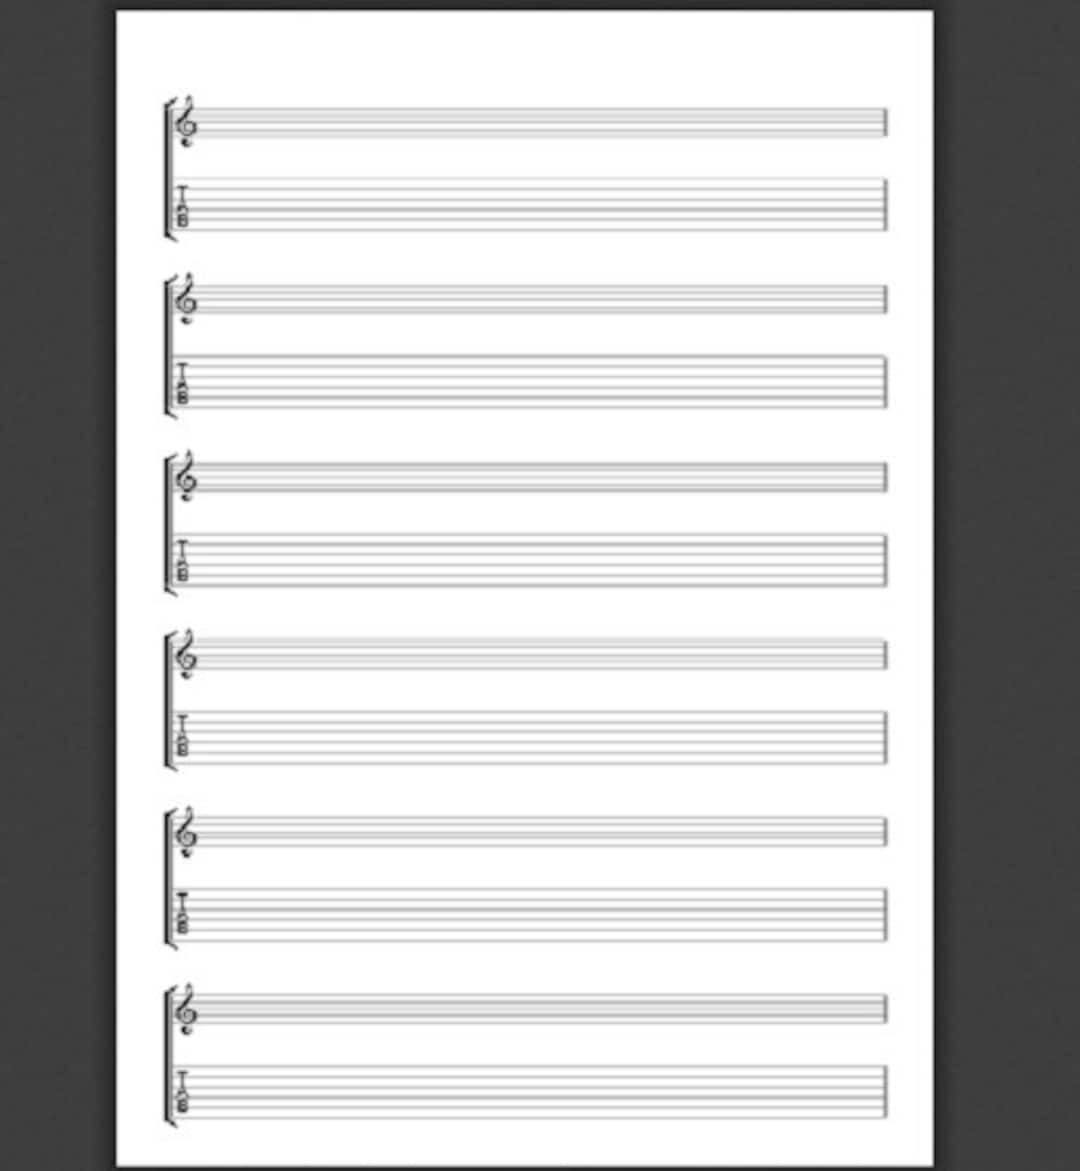 You Only Live Once (Guitar Tab) - Print Sheet Music Now